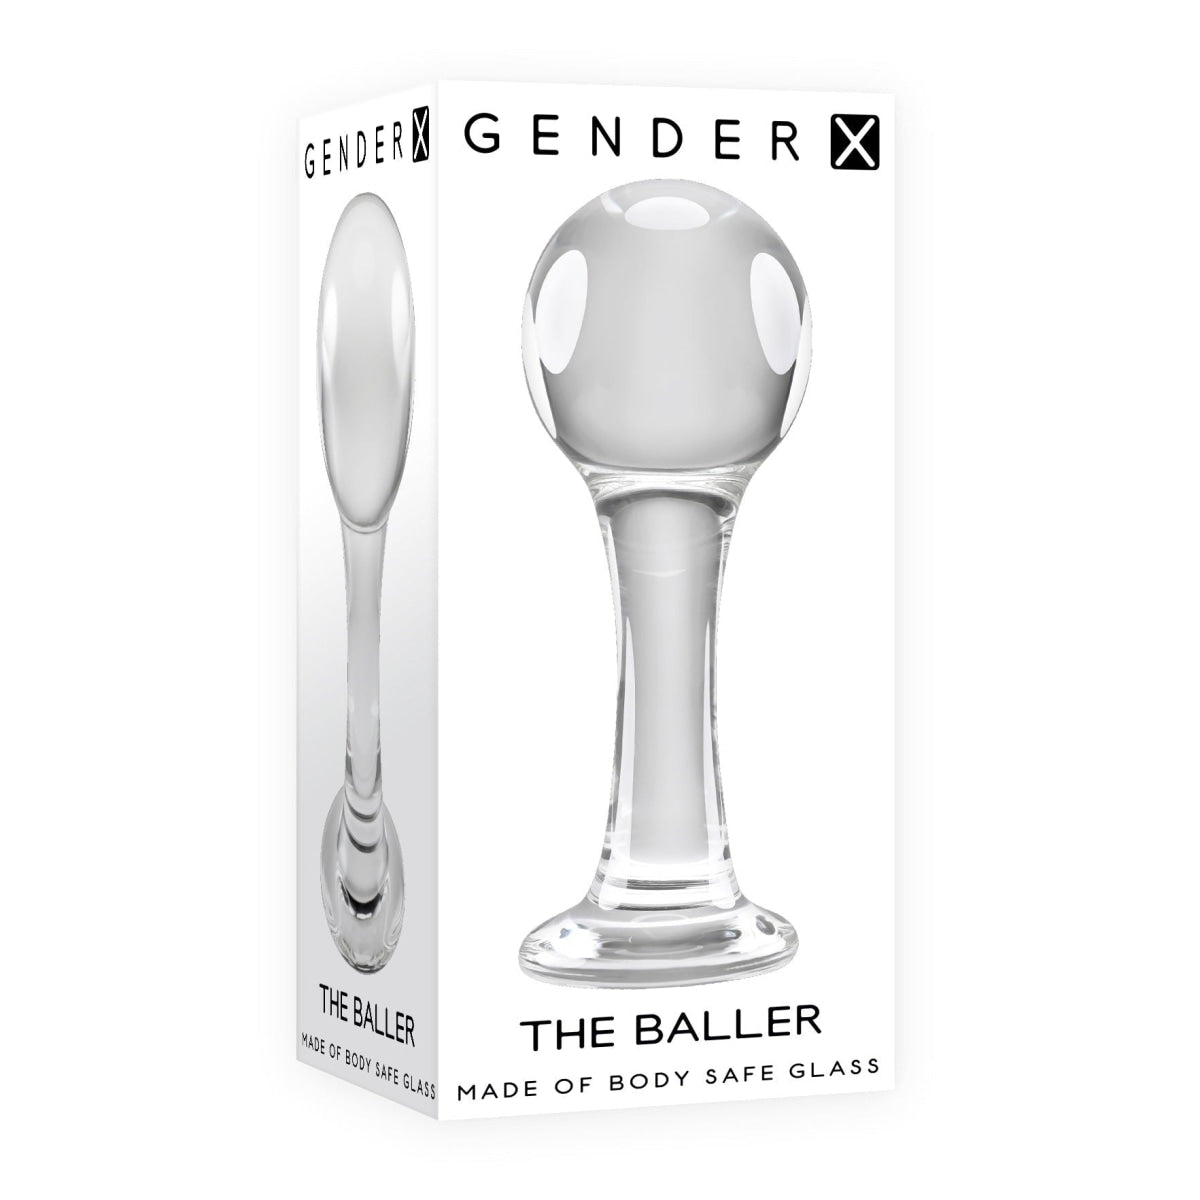 Gender X The Baller Intimates Adult Boutique